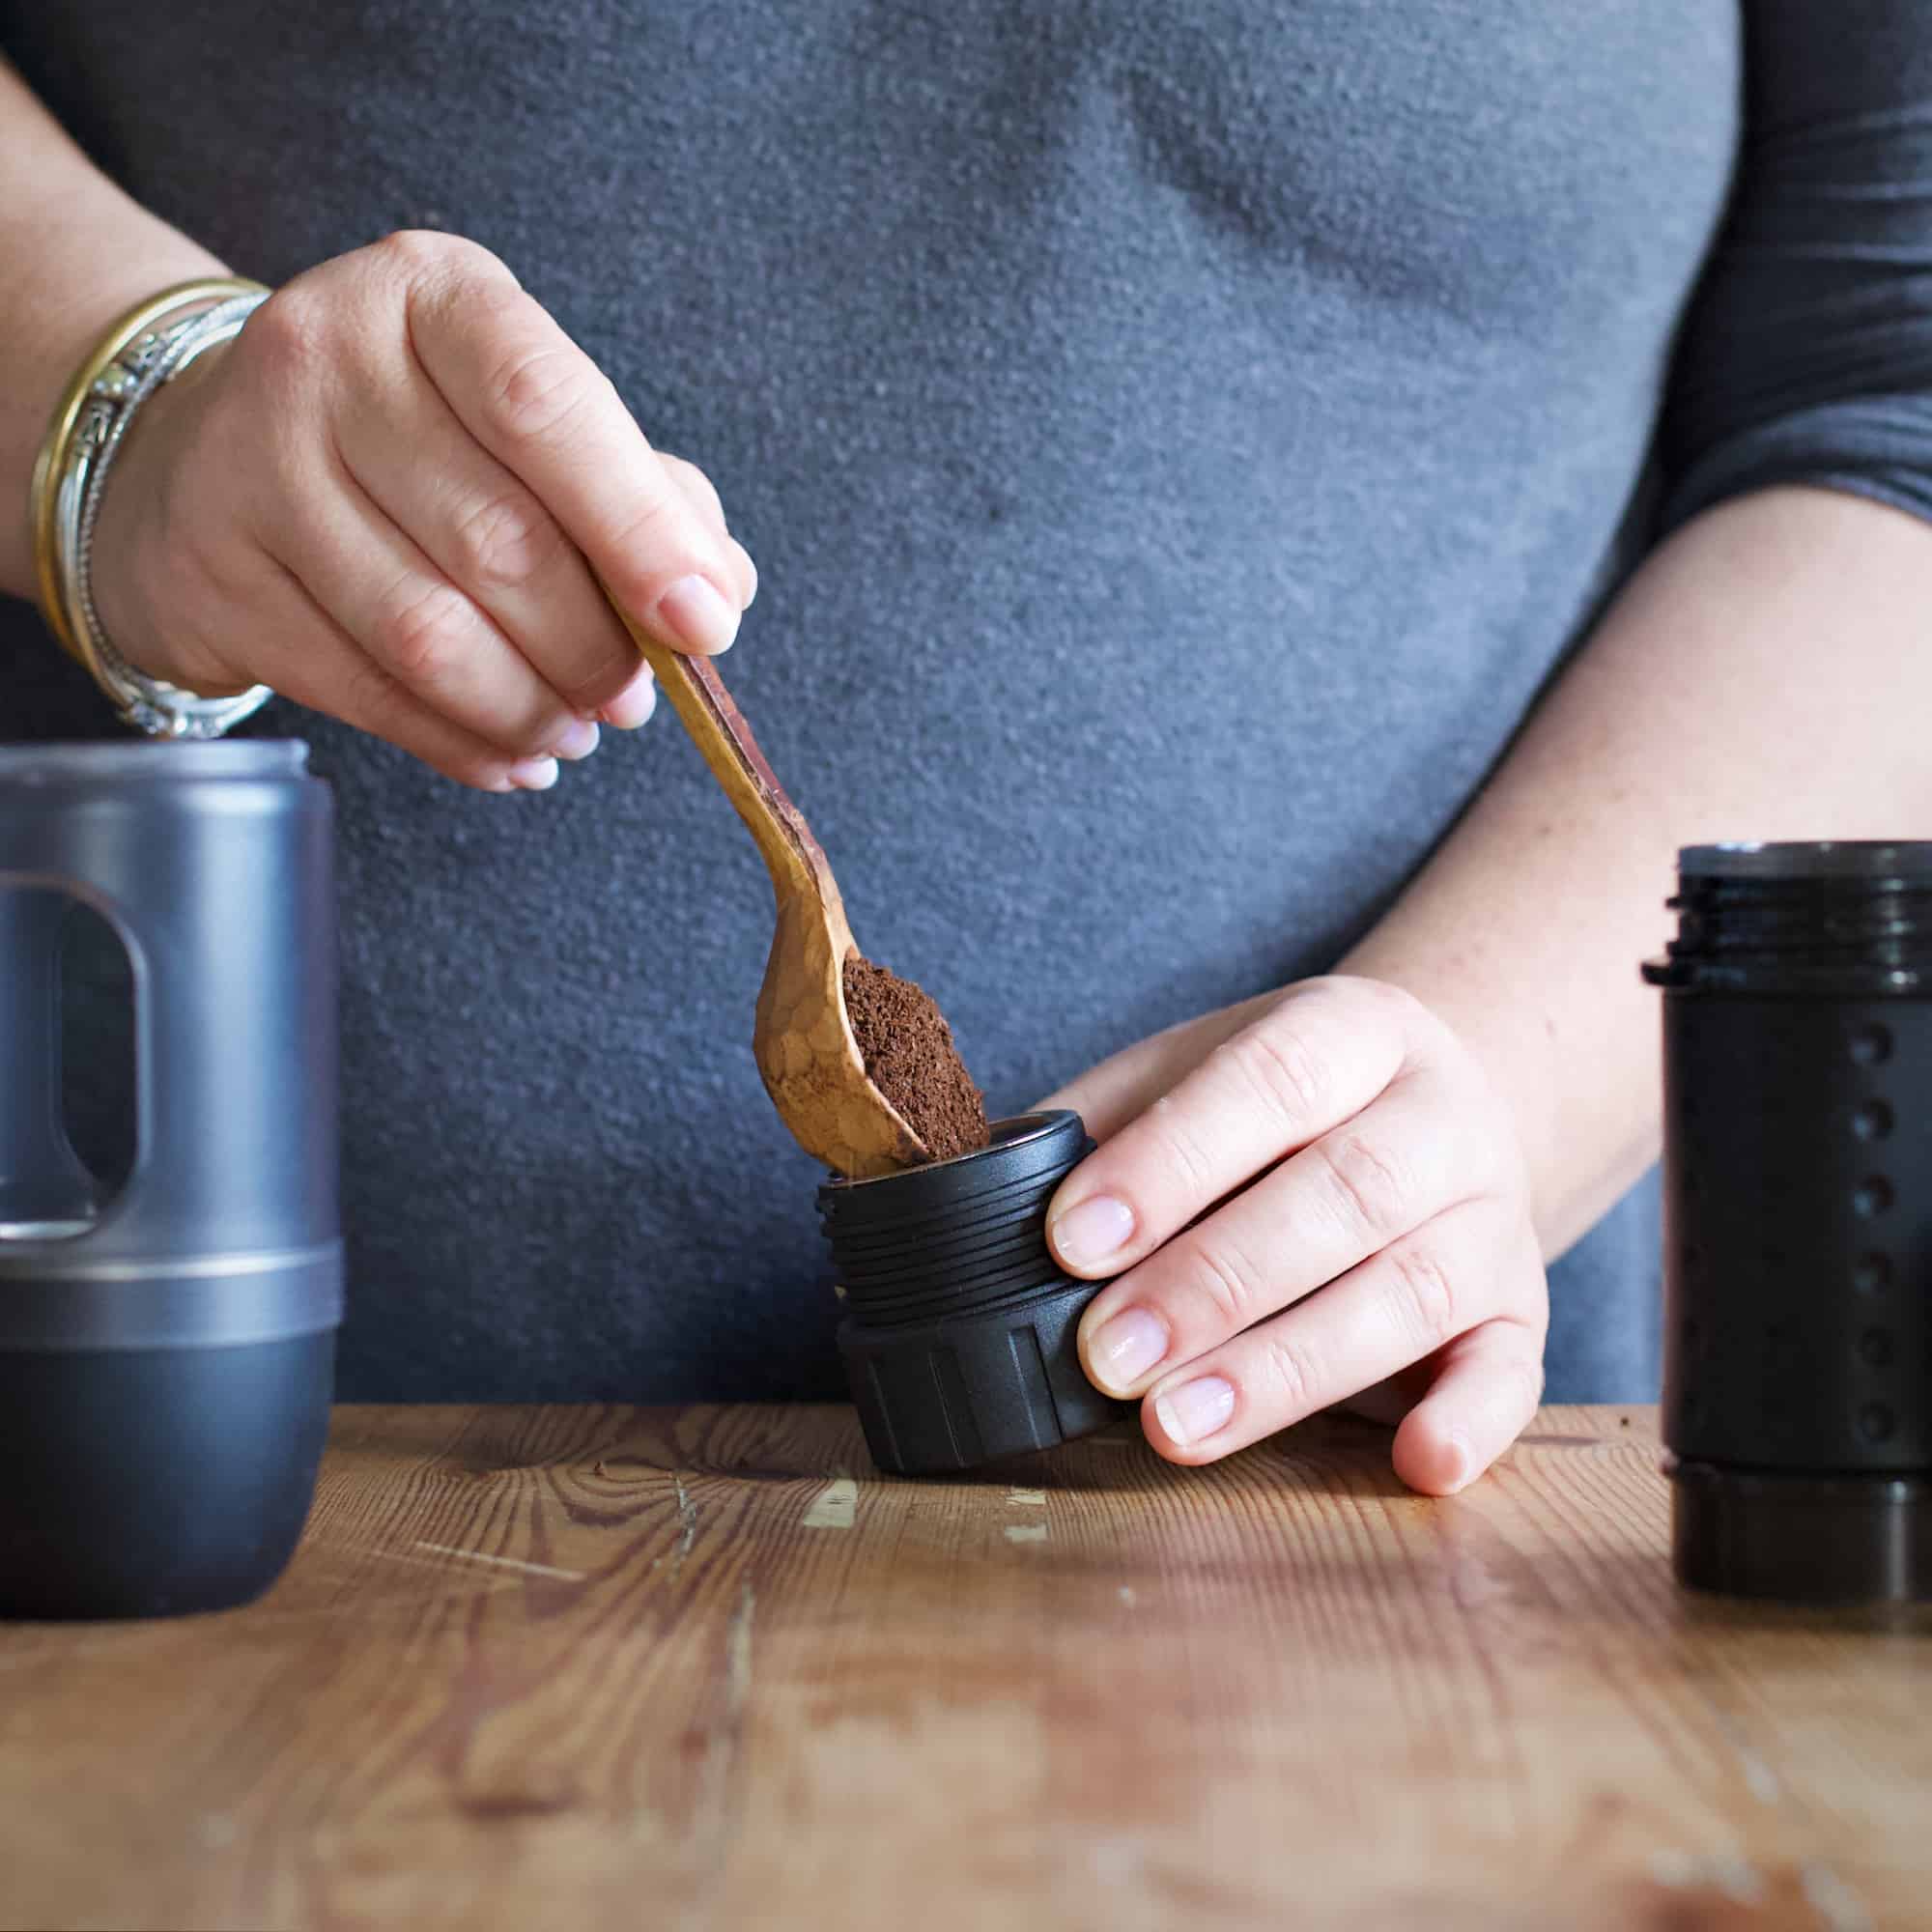 Womans hands scooping freshly ground coffee beans into an espresso maker